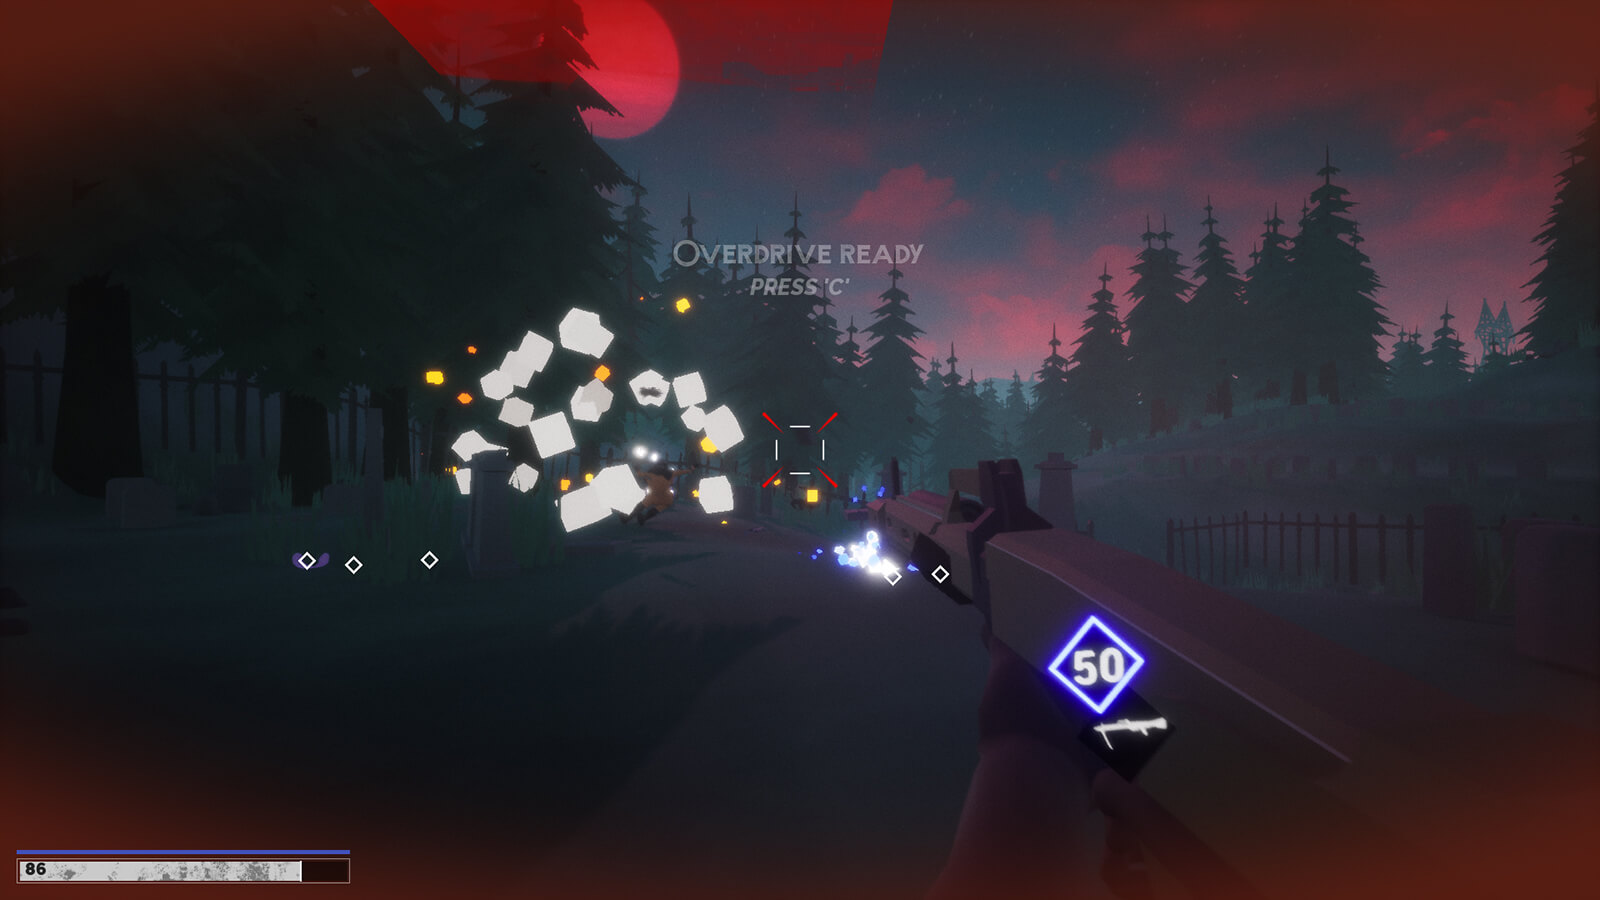 The player holds a machine gun as they're shot at by enemies and collectibles erupt from slain foes.